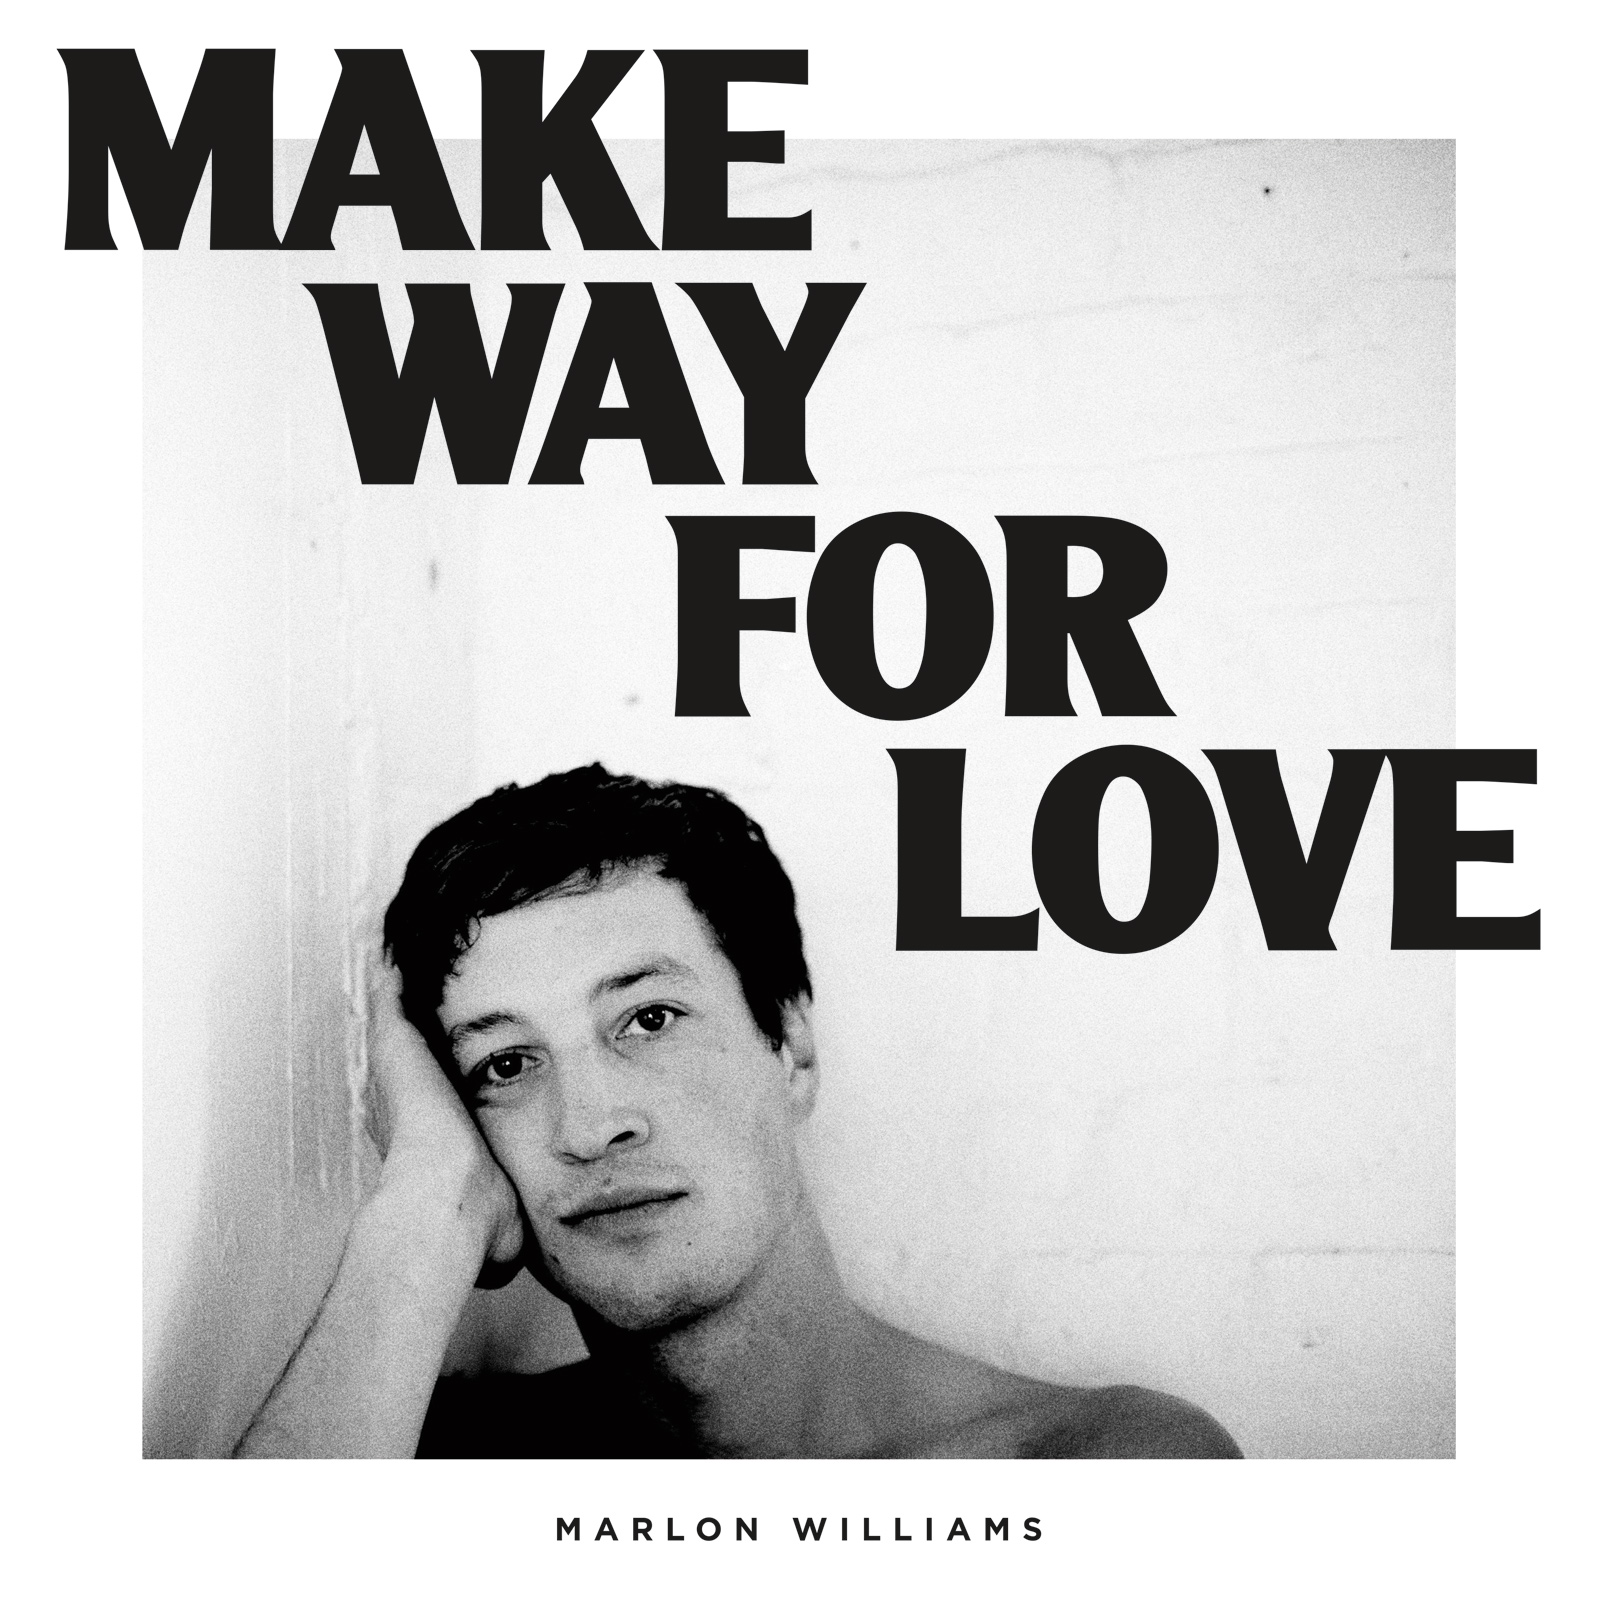 Make Way For Love (limited White Edition) (vinyl)